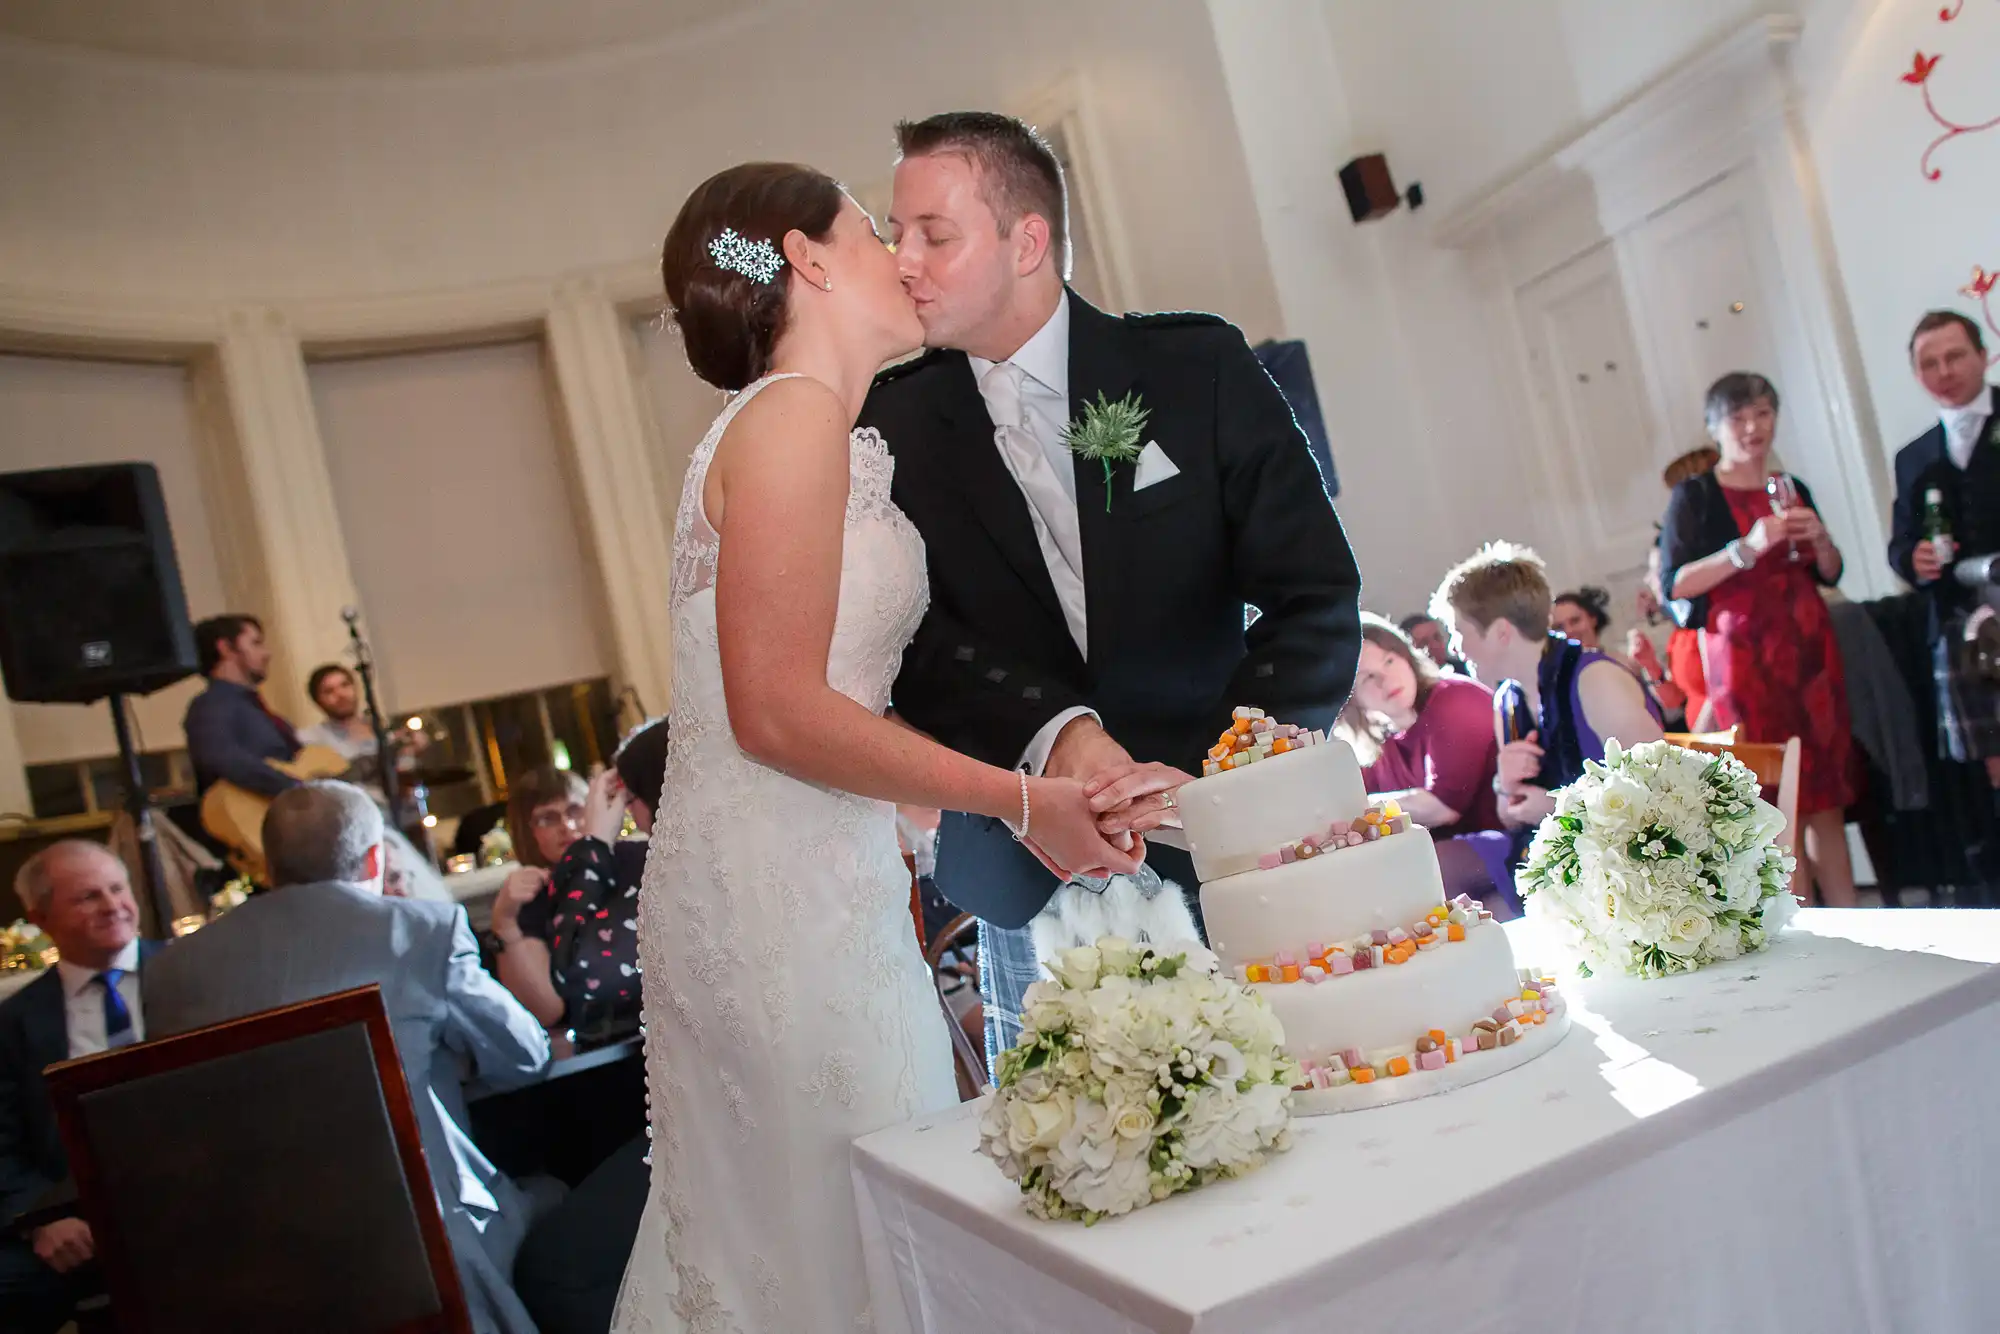 A bride and groom kiss while cutting a white tiered wedding cake, surrounded by guests in a brightly lit room.